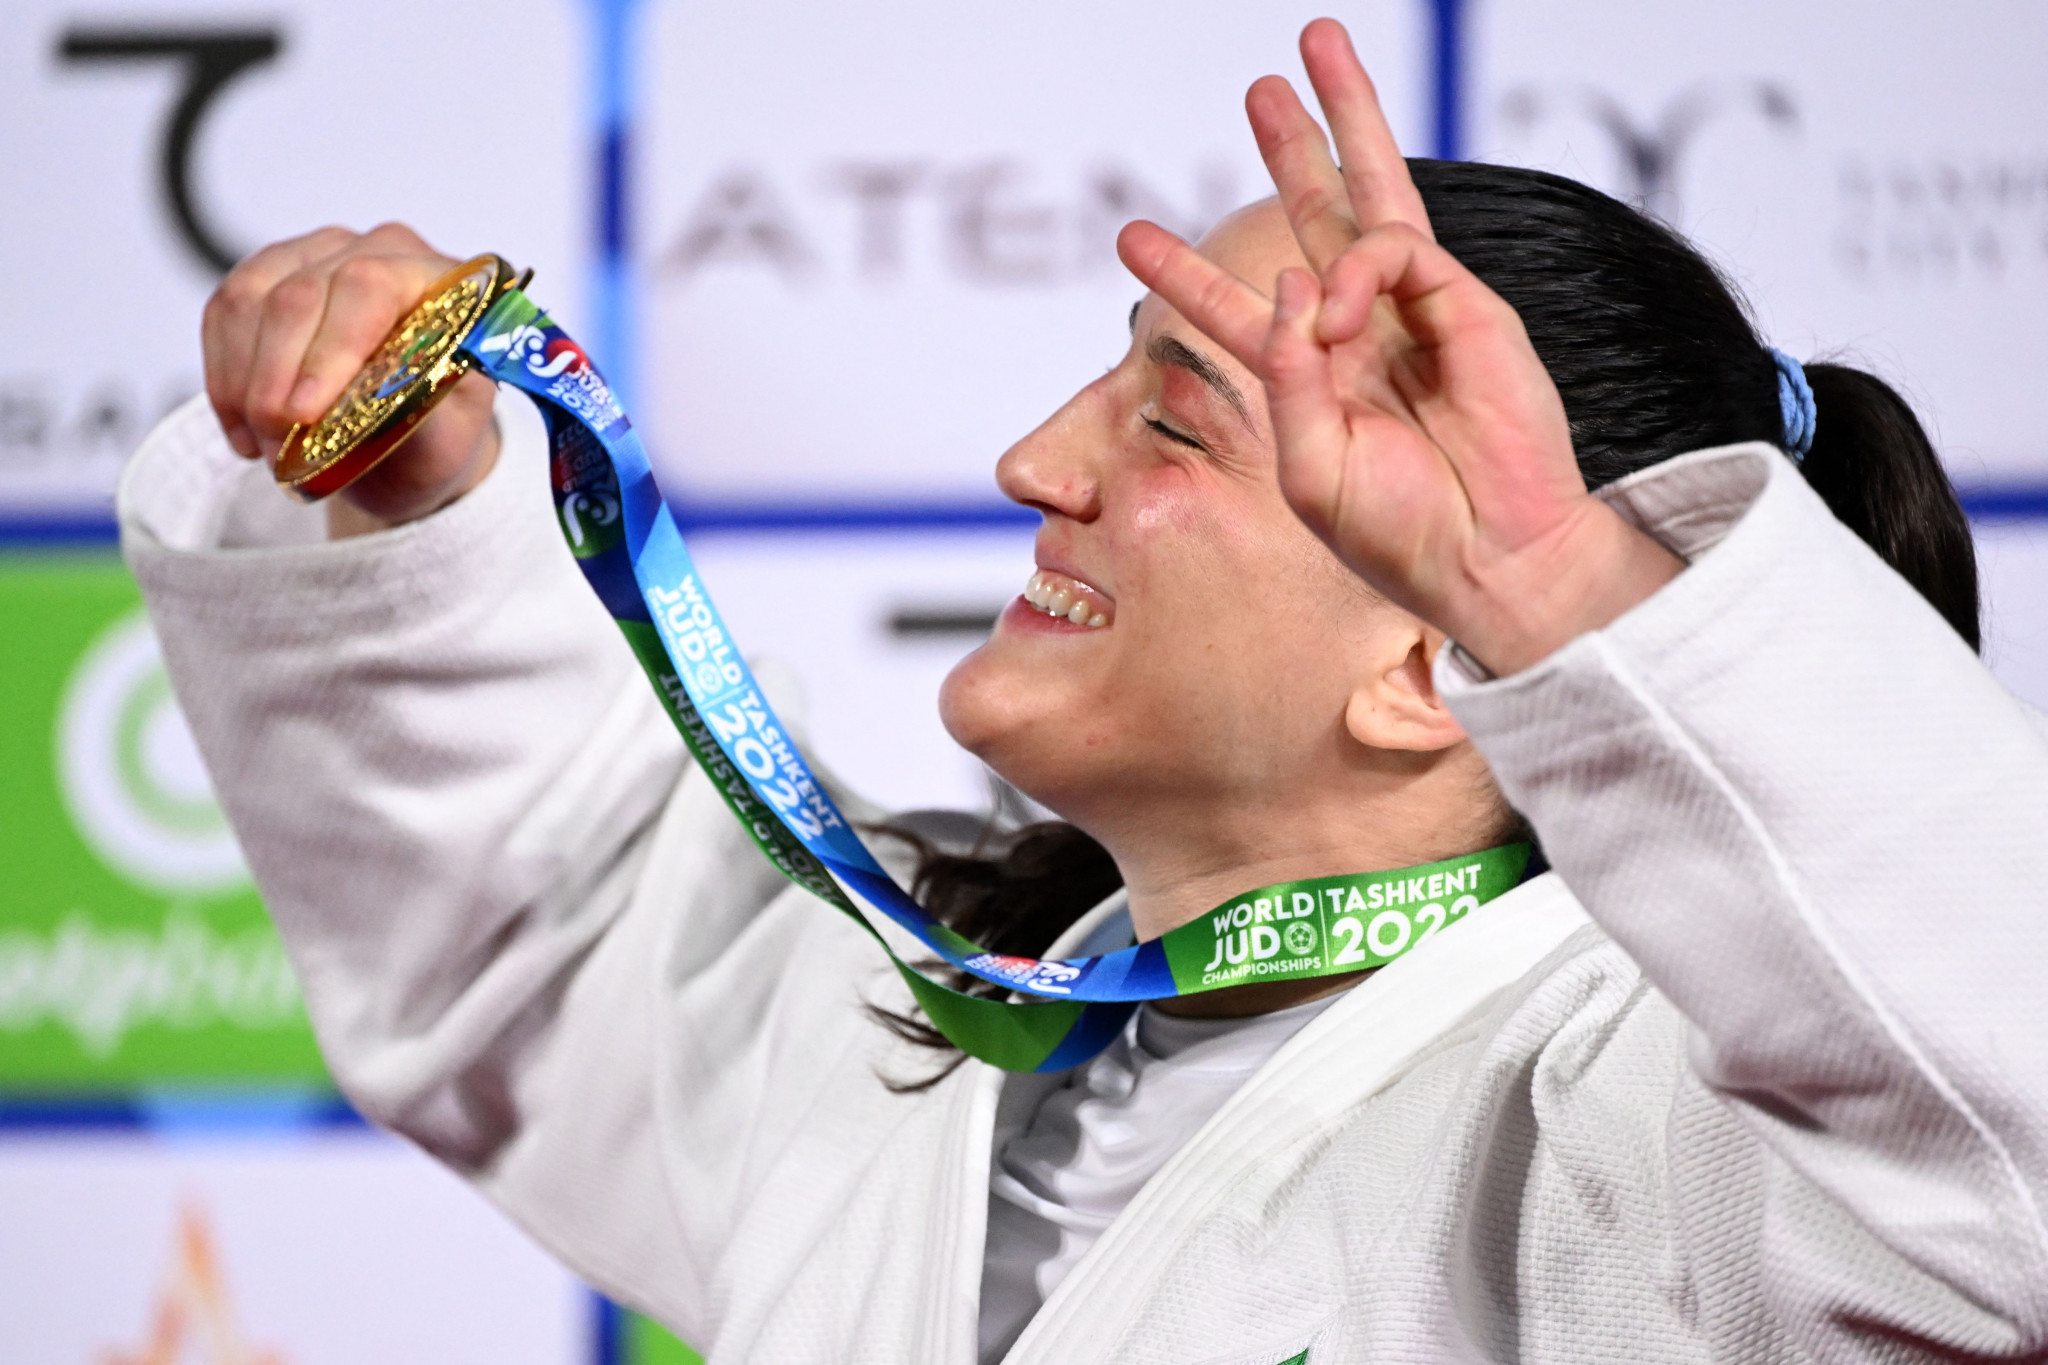 The victory marked Aguiar's third gold medal at the World Judo Championships ©Getty Images